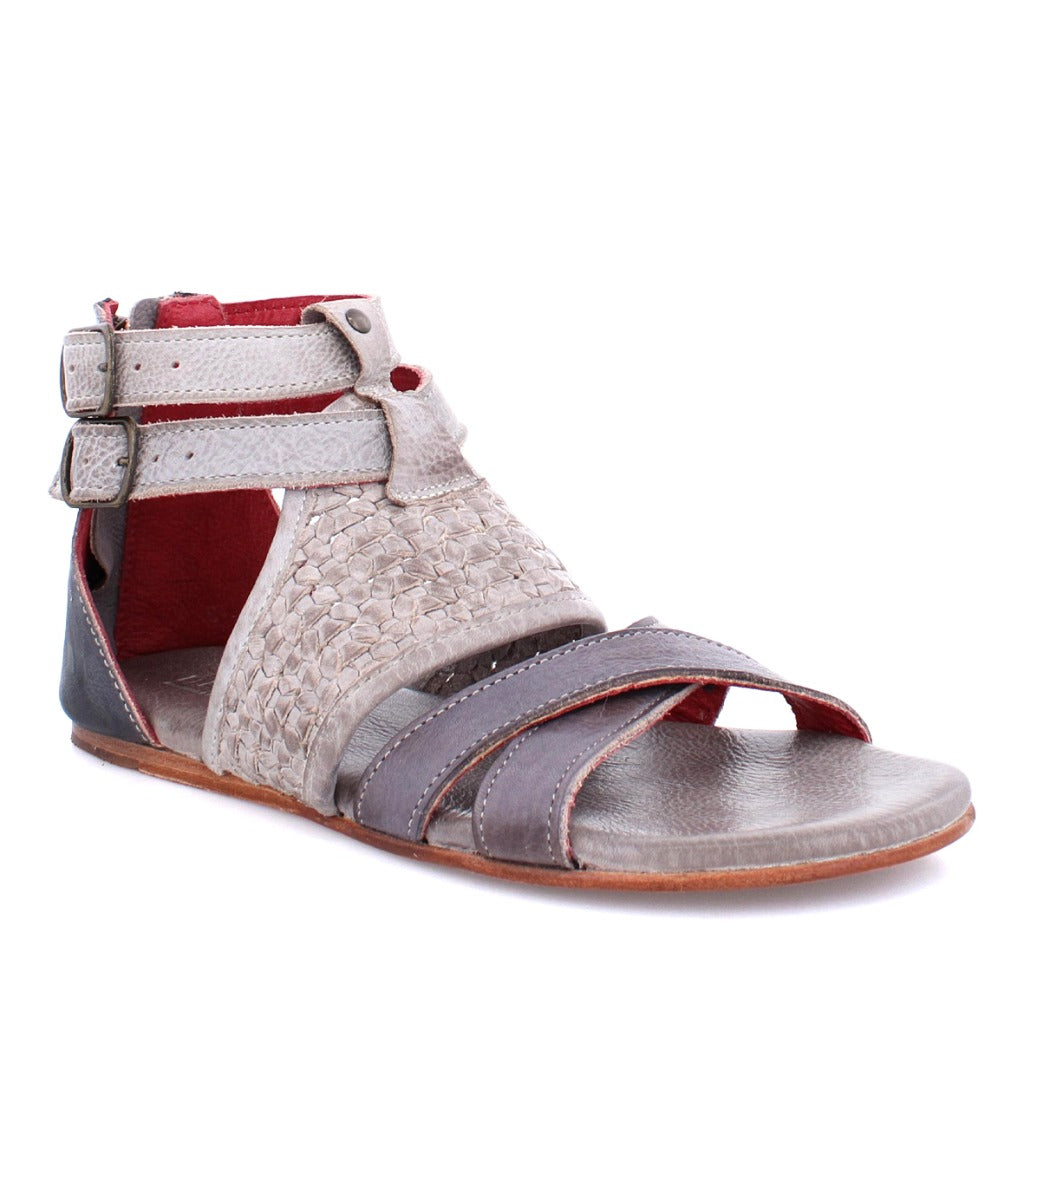 A women's Capriana sandal with two straps from the brand Bed Stu.